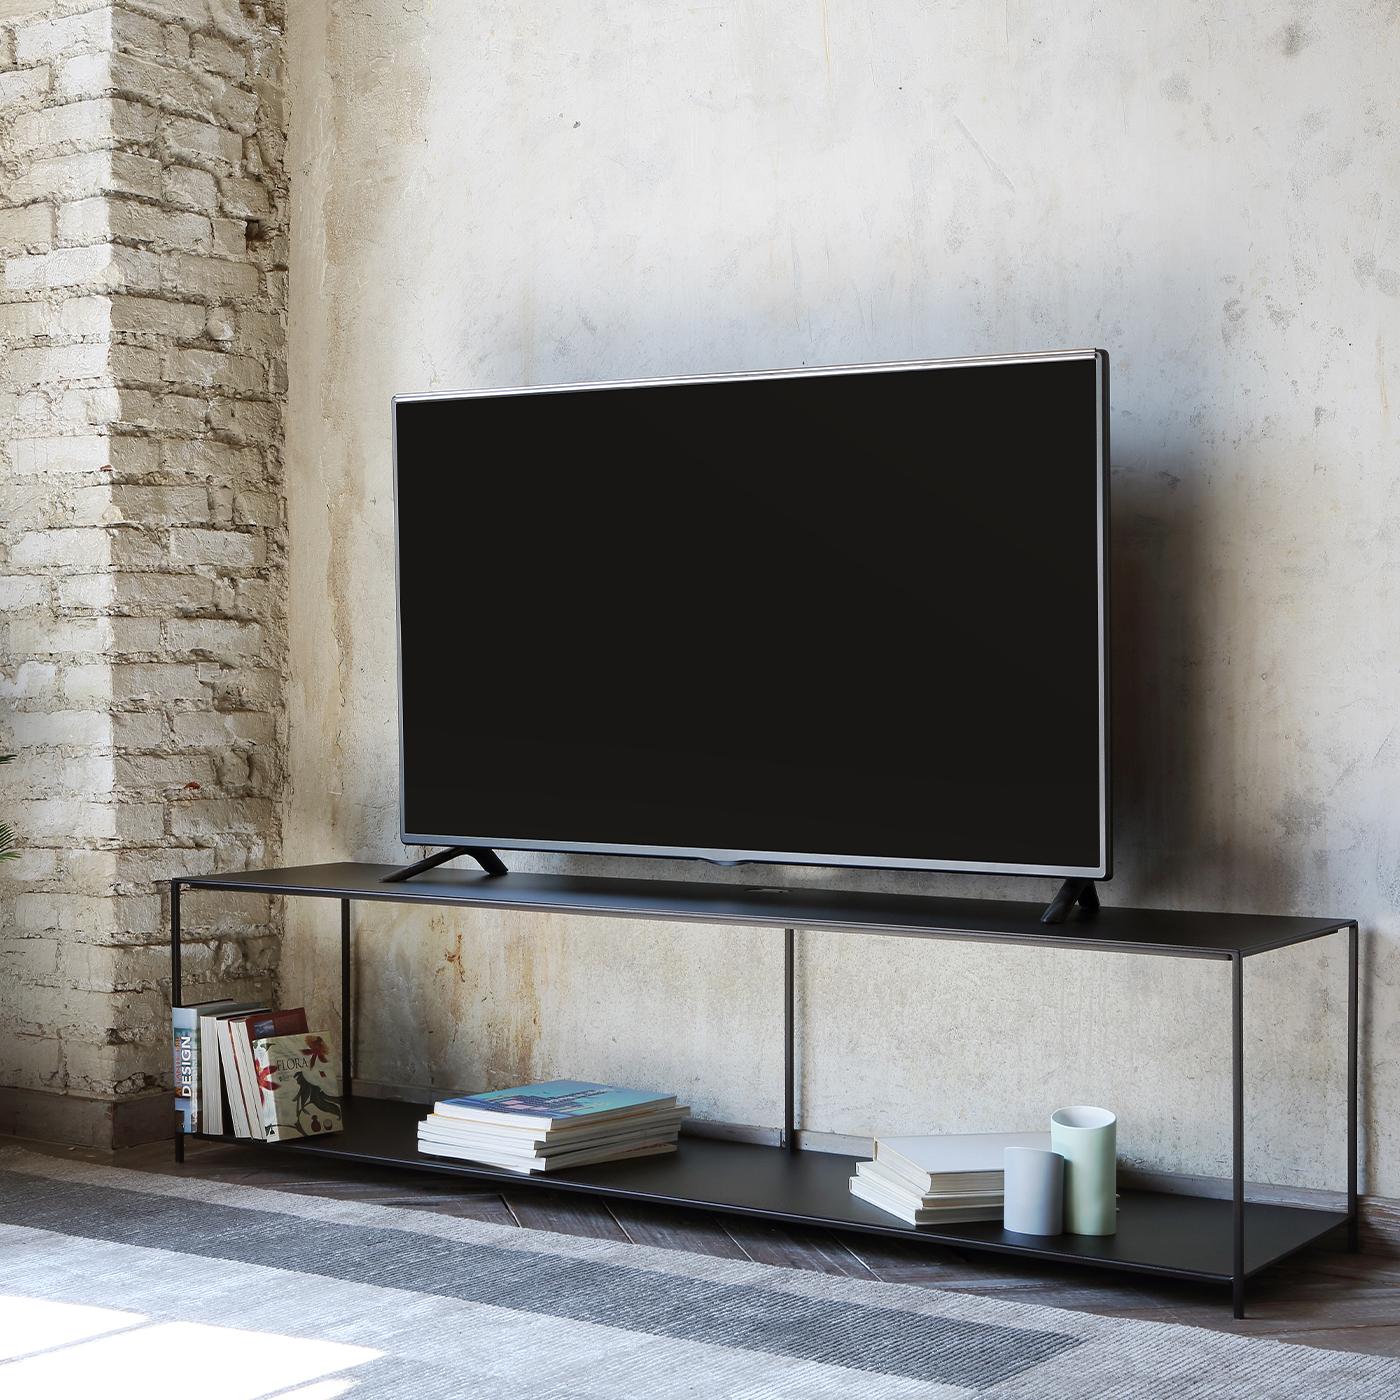 An ode to minimalism easily expressed through clean and rigorous lines, this copper TV stand makes for a clever and coherent addition to essential-style contemporary decors. Five thin cylindrical elements sustain both the top and the lower shelf,